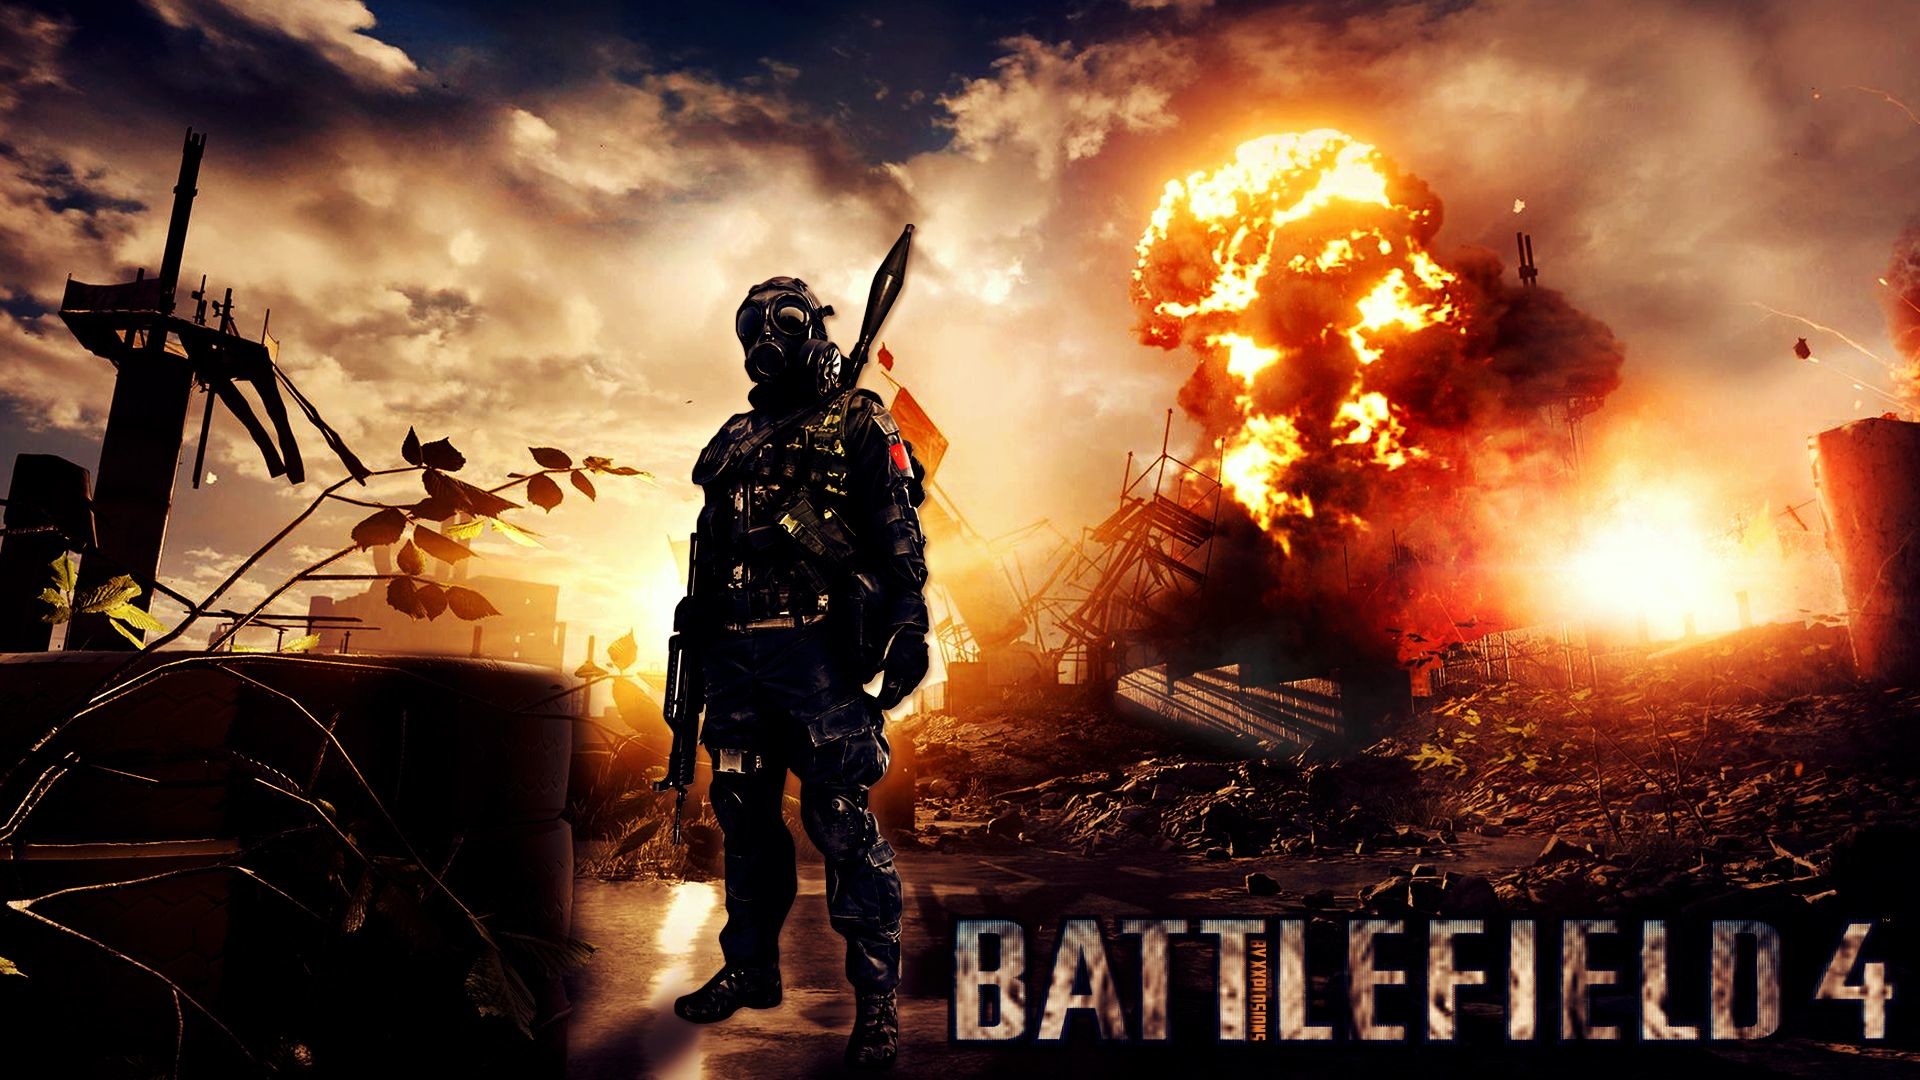 1920x1080 Battlefield 4 Awesome Wallpapers Attachment 17431 - Amazing Wallpaperz